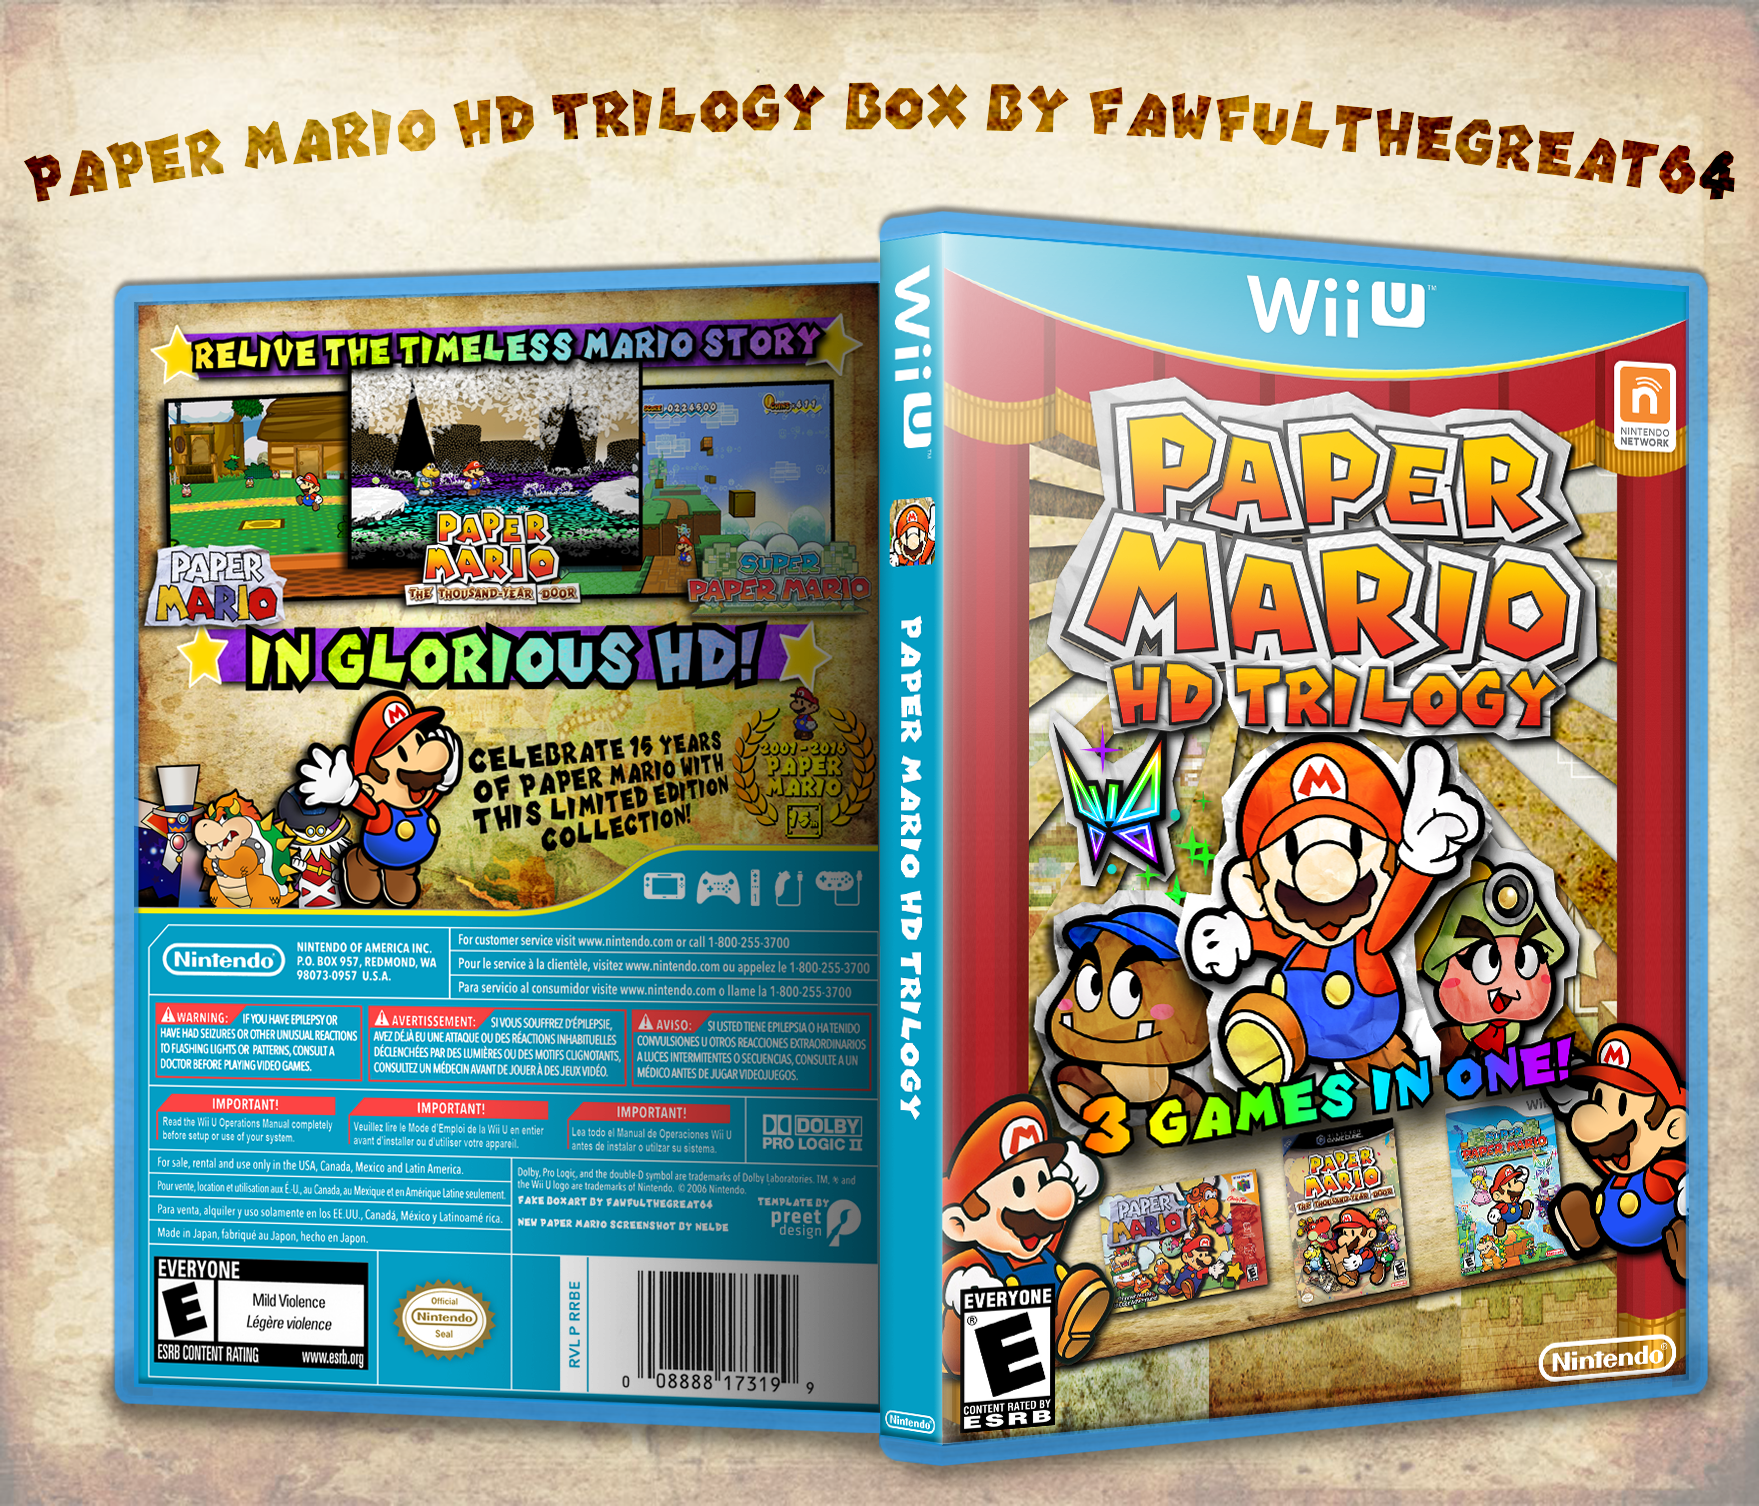 Paper Mario HD Trilogy box cover